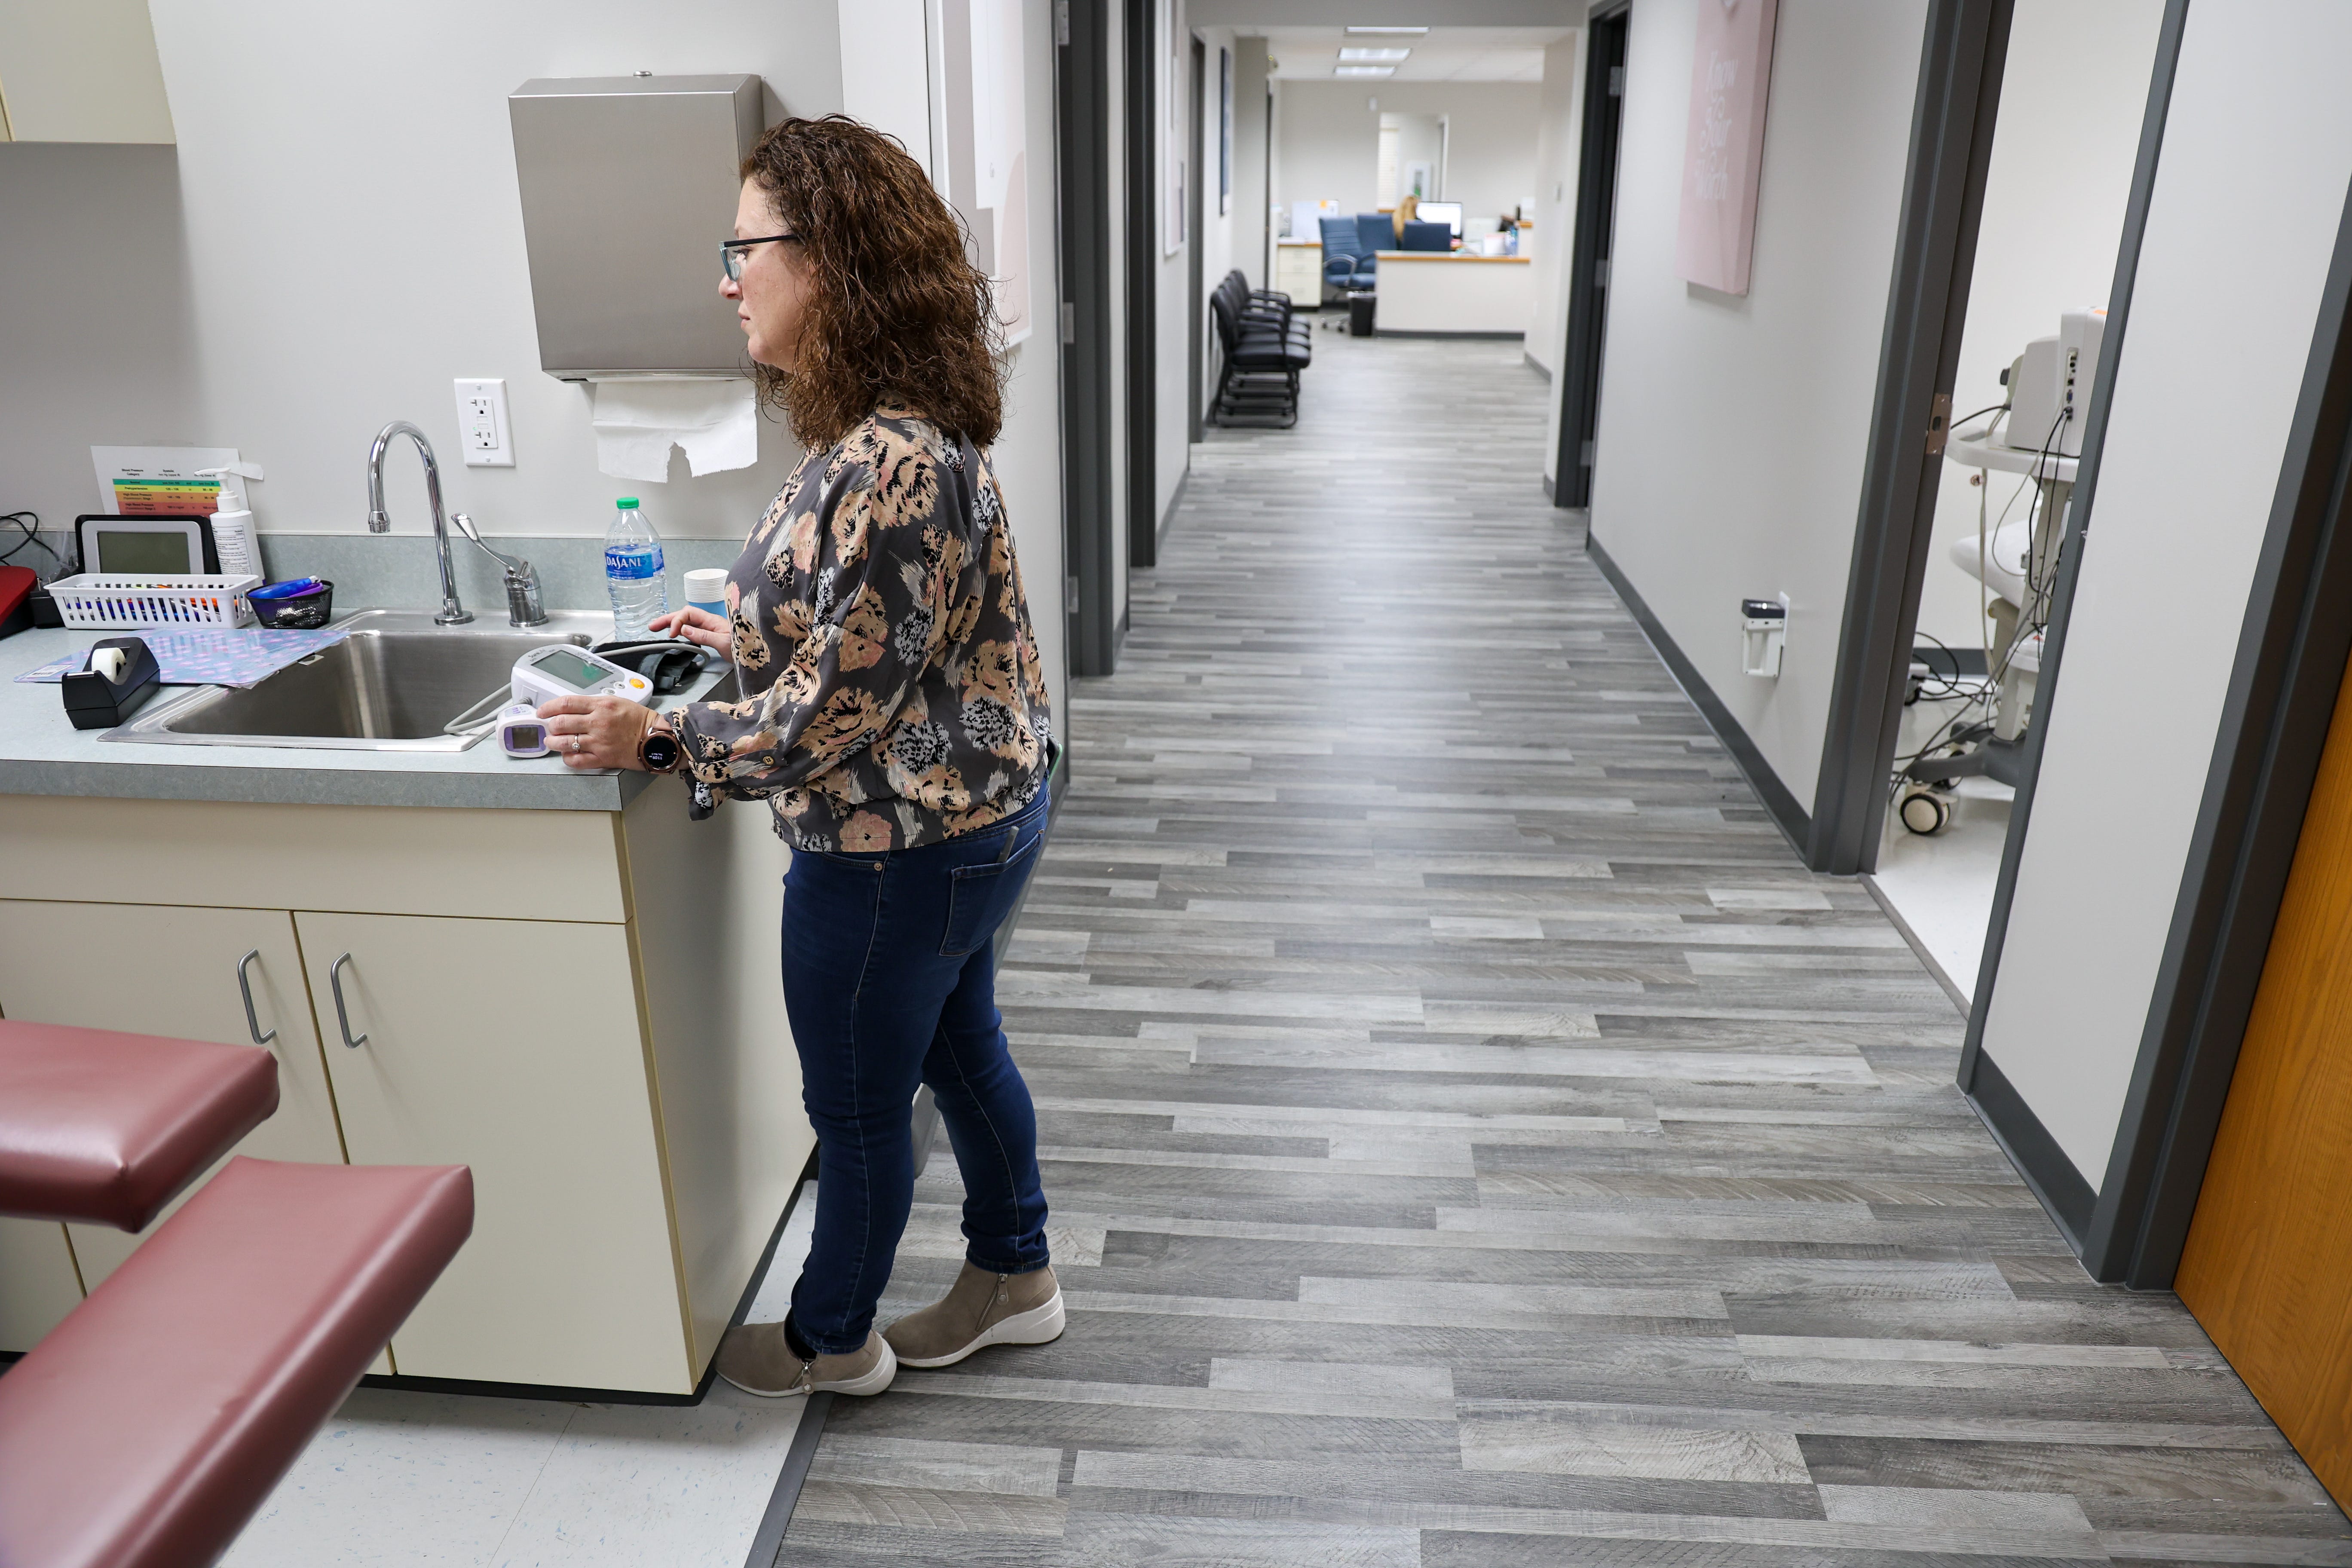 Andrea Gallegos, administrator of the Alamo clinic, decided to move to 14 hours away to open the clinic in Carbondale in hopes of serving women traveling for abortions.  “We're essentially in the same position that patients are," she said.